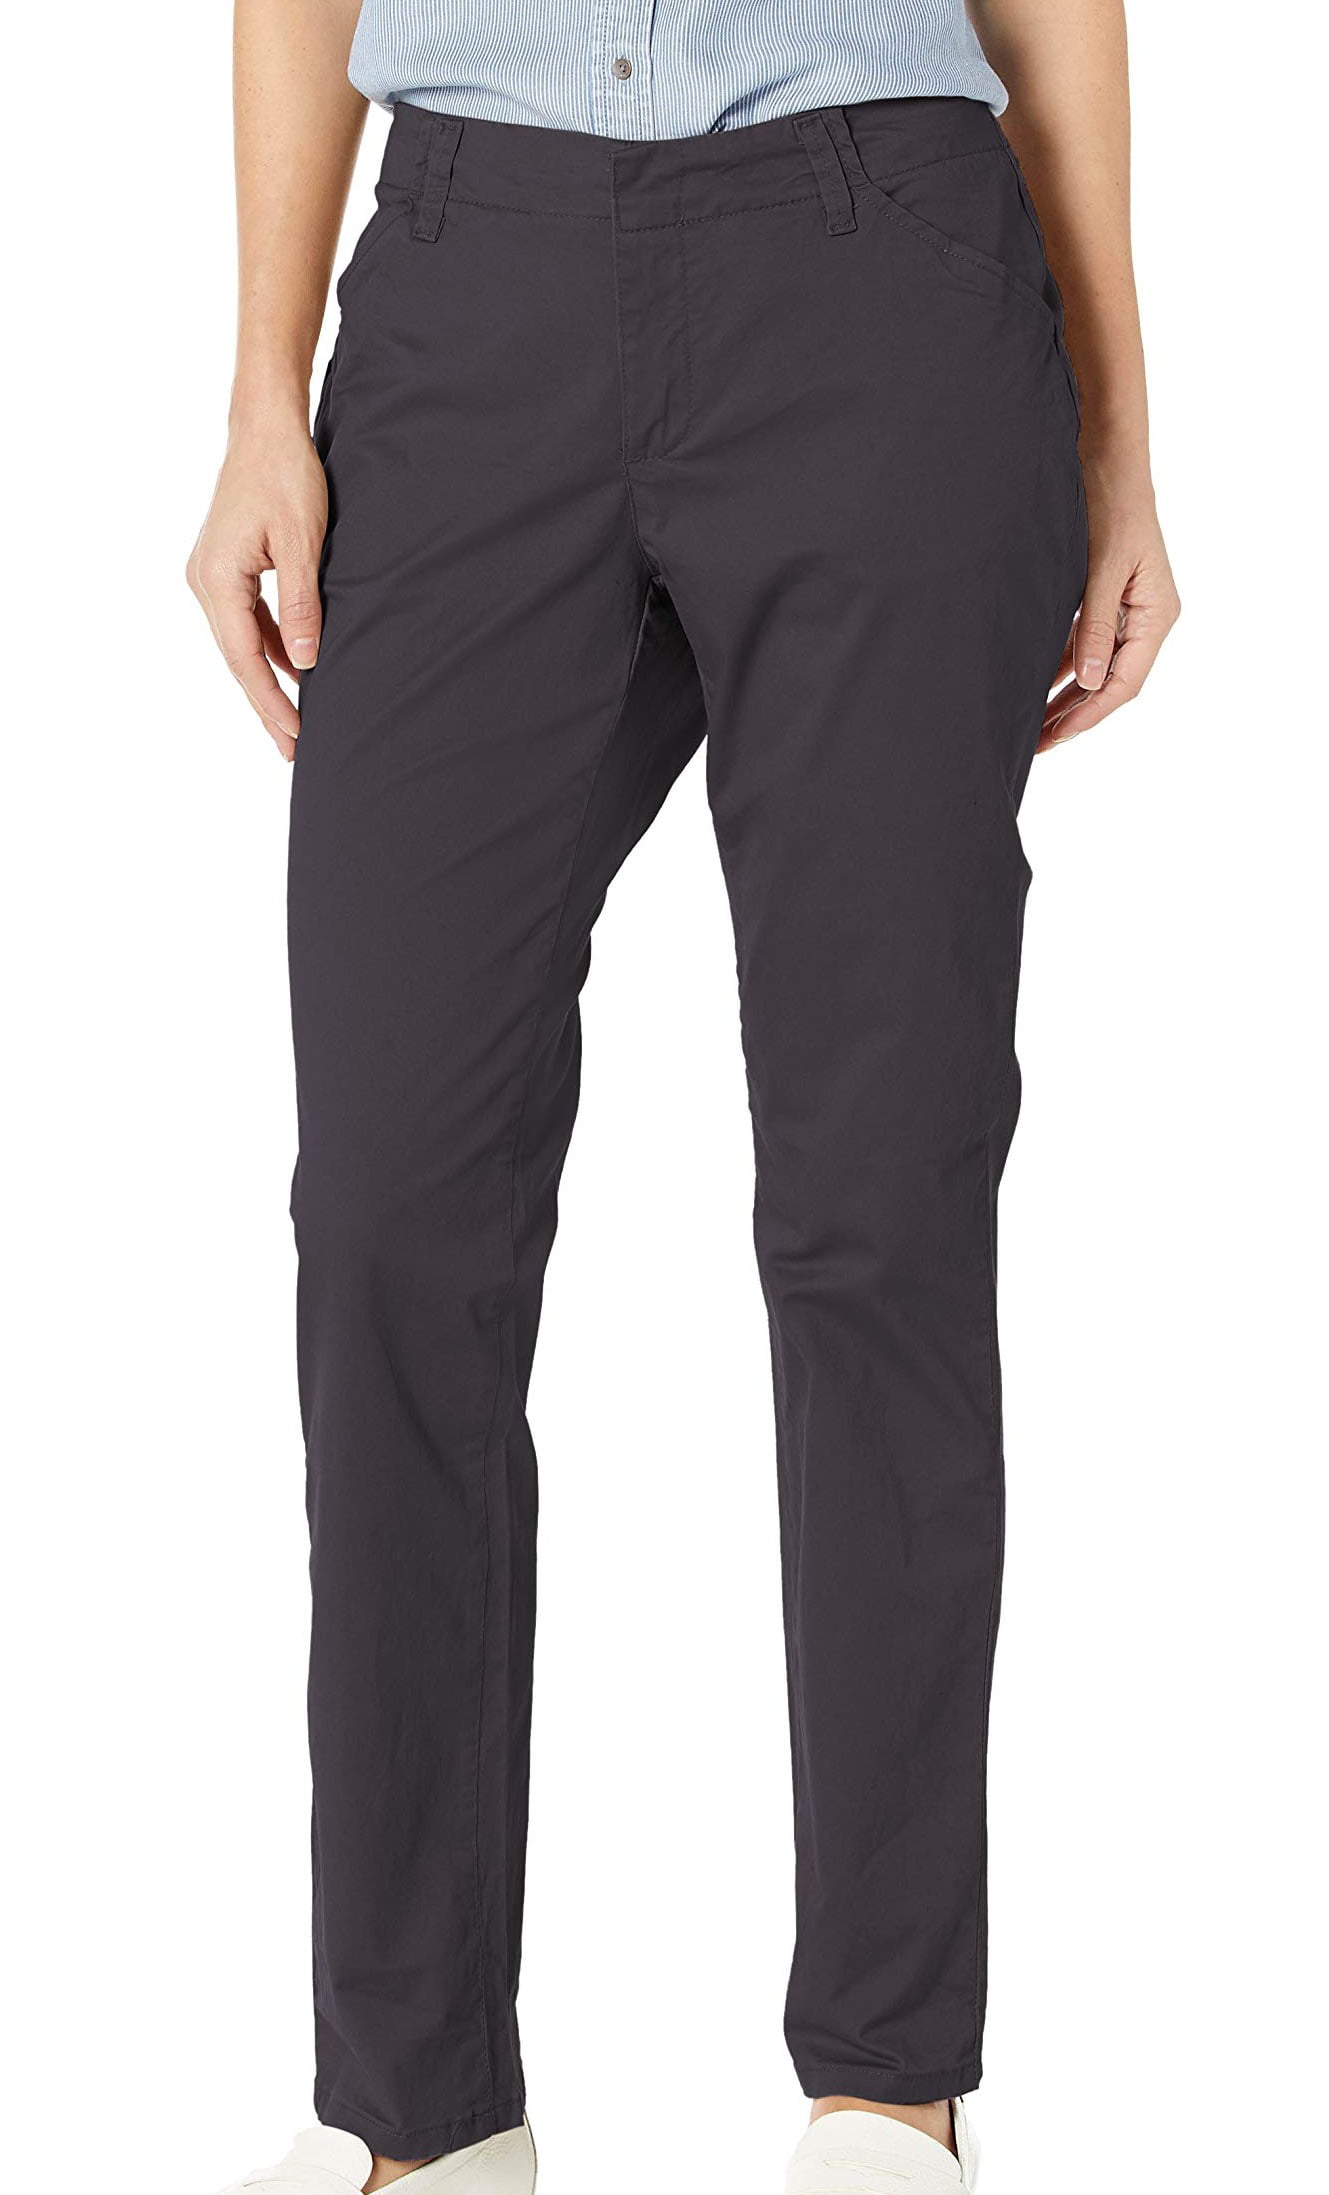 Lee Womens Midrise Fit Essential Chino Pant